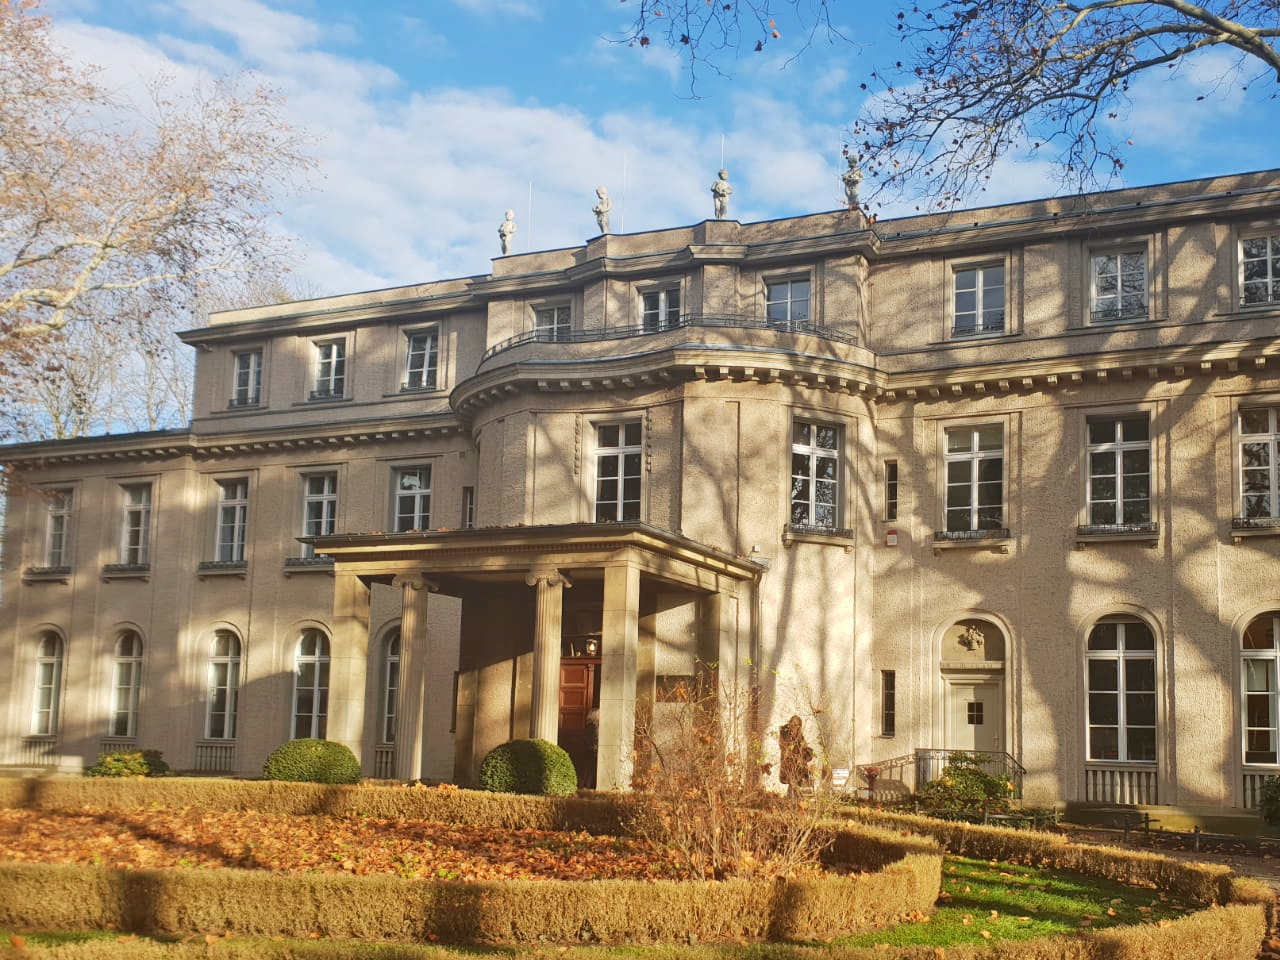 The site of the Wannsee Conference near Berlin